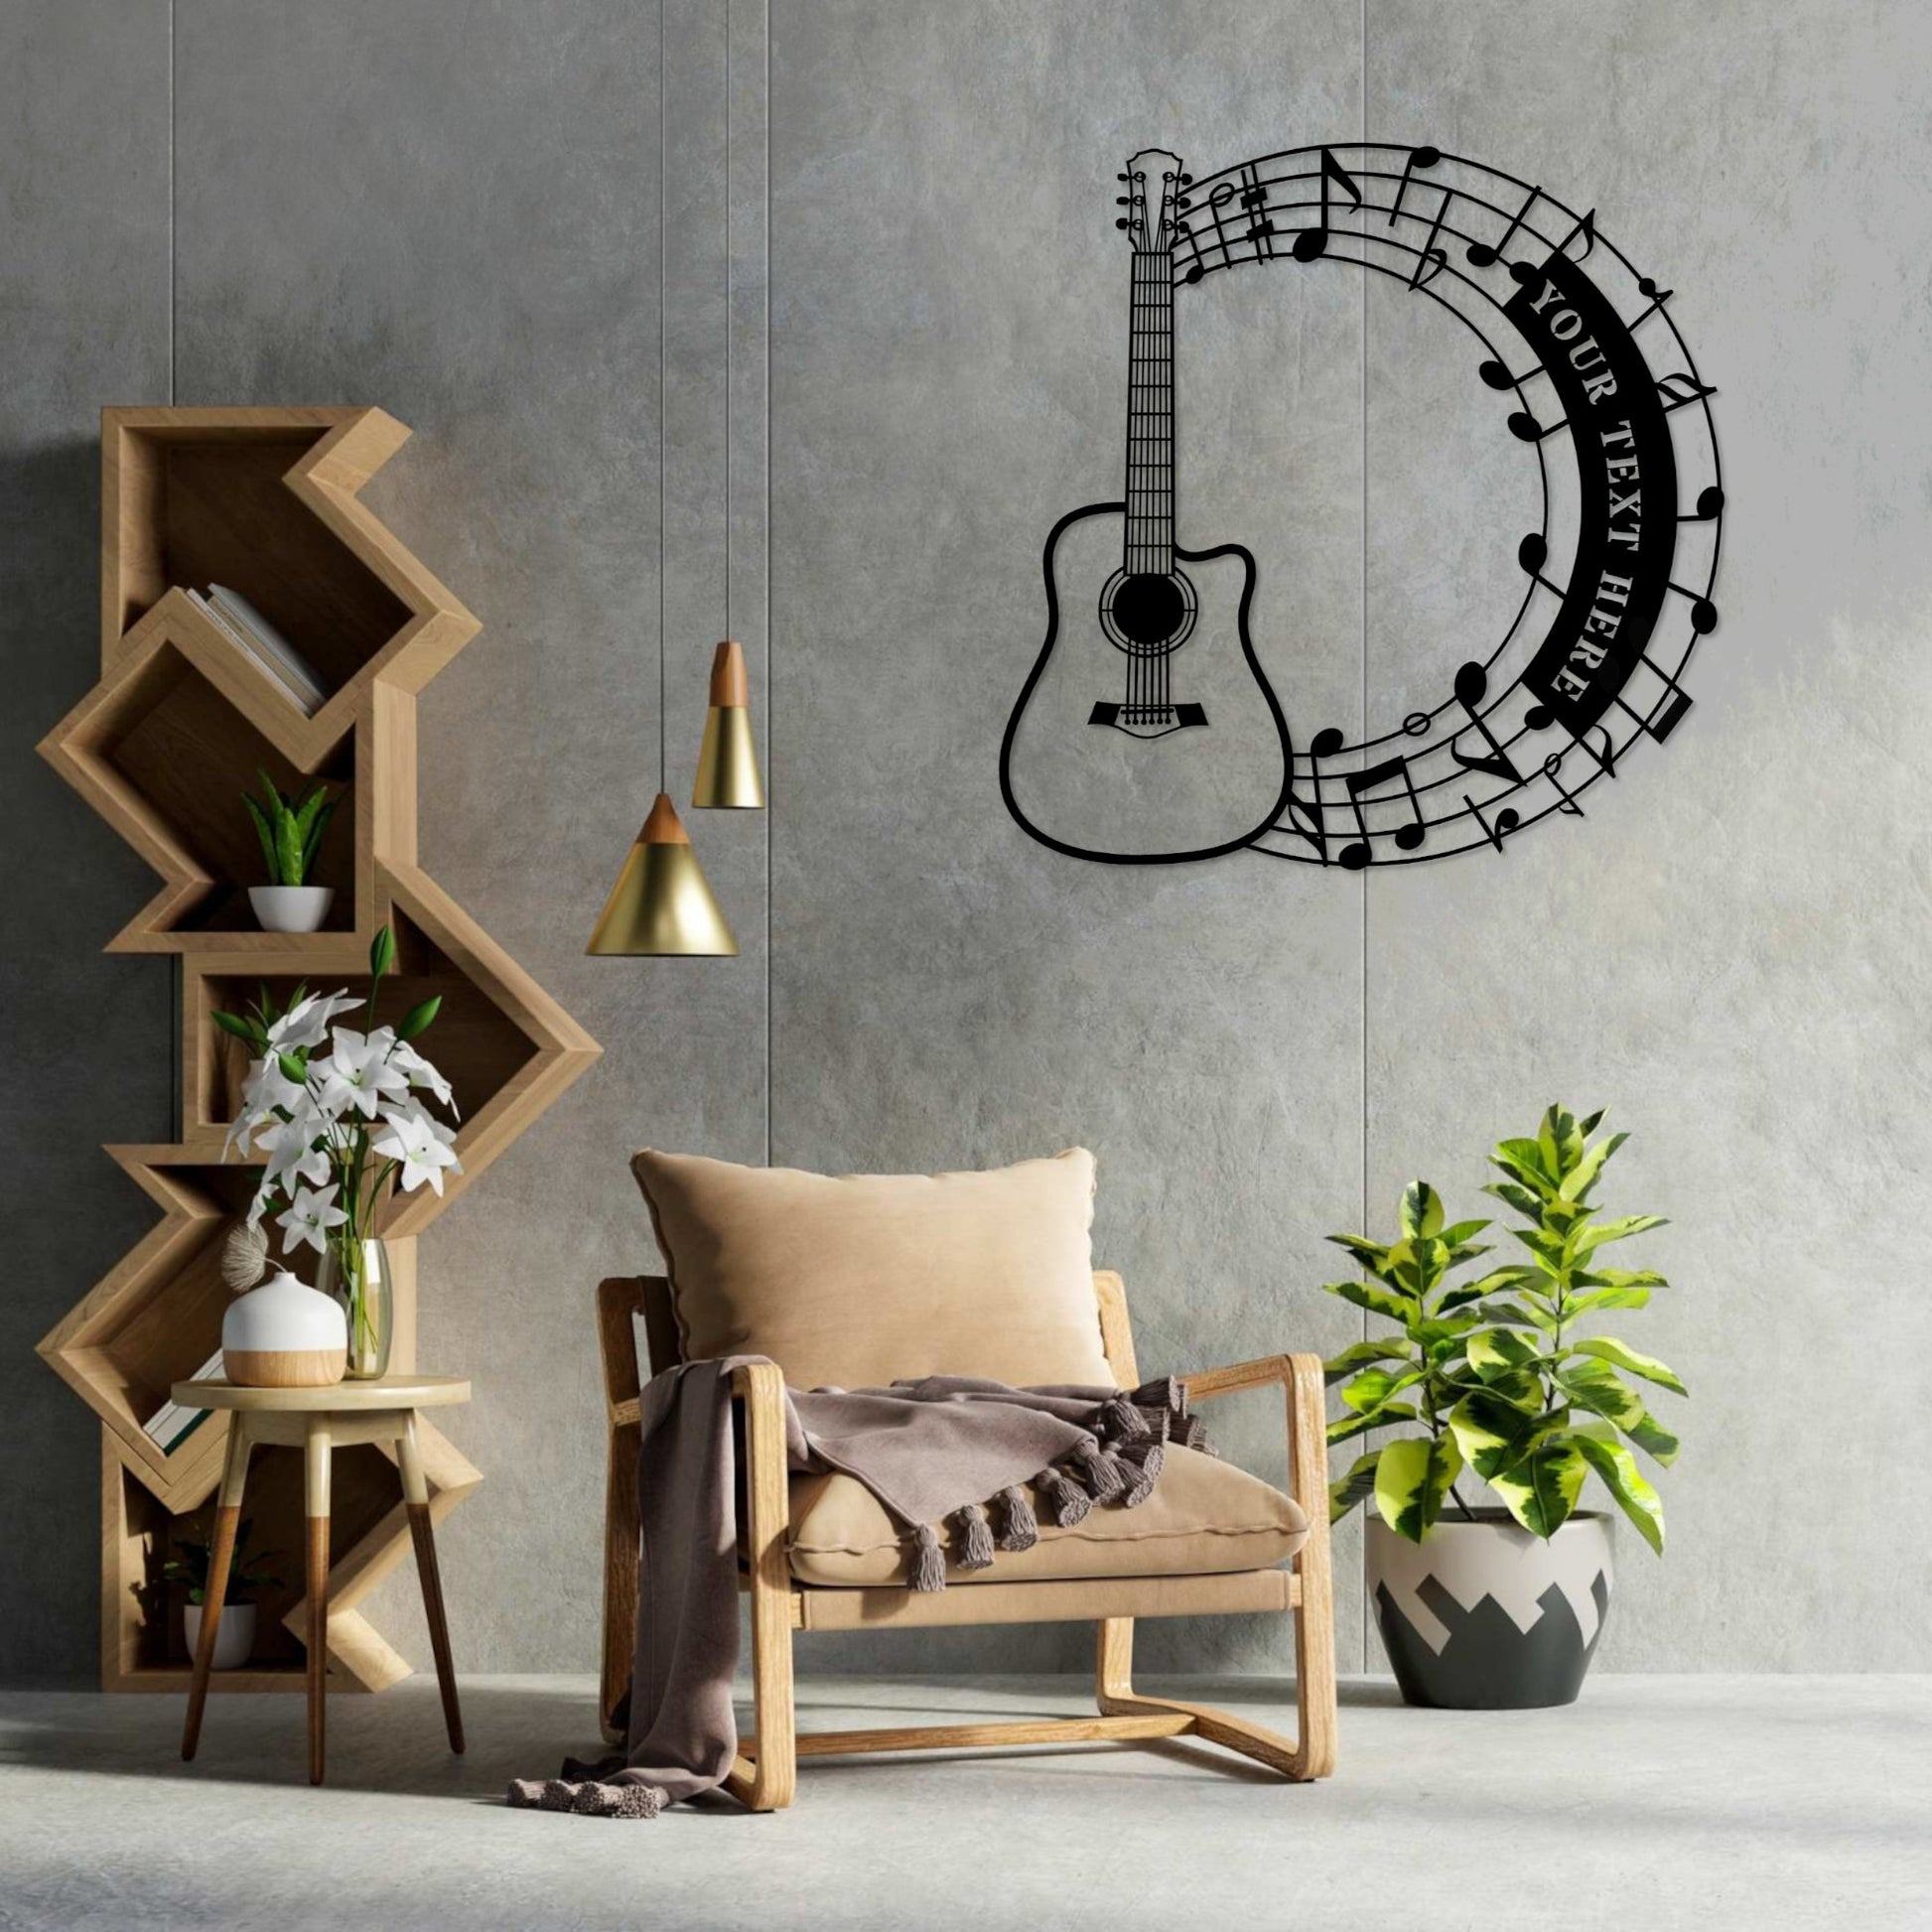 Personalized Acoustic Guitar In Notes Name Metal Sign Gift. Custom Guitarist Decor. Musician Entertainer Monogram. Musical Wall Hanging Gift